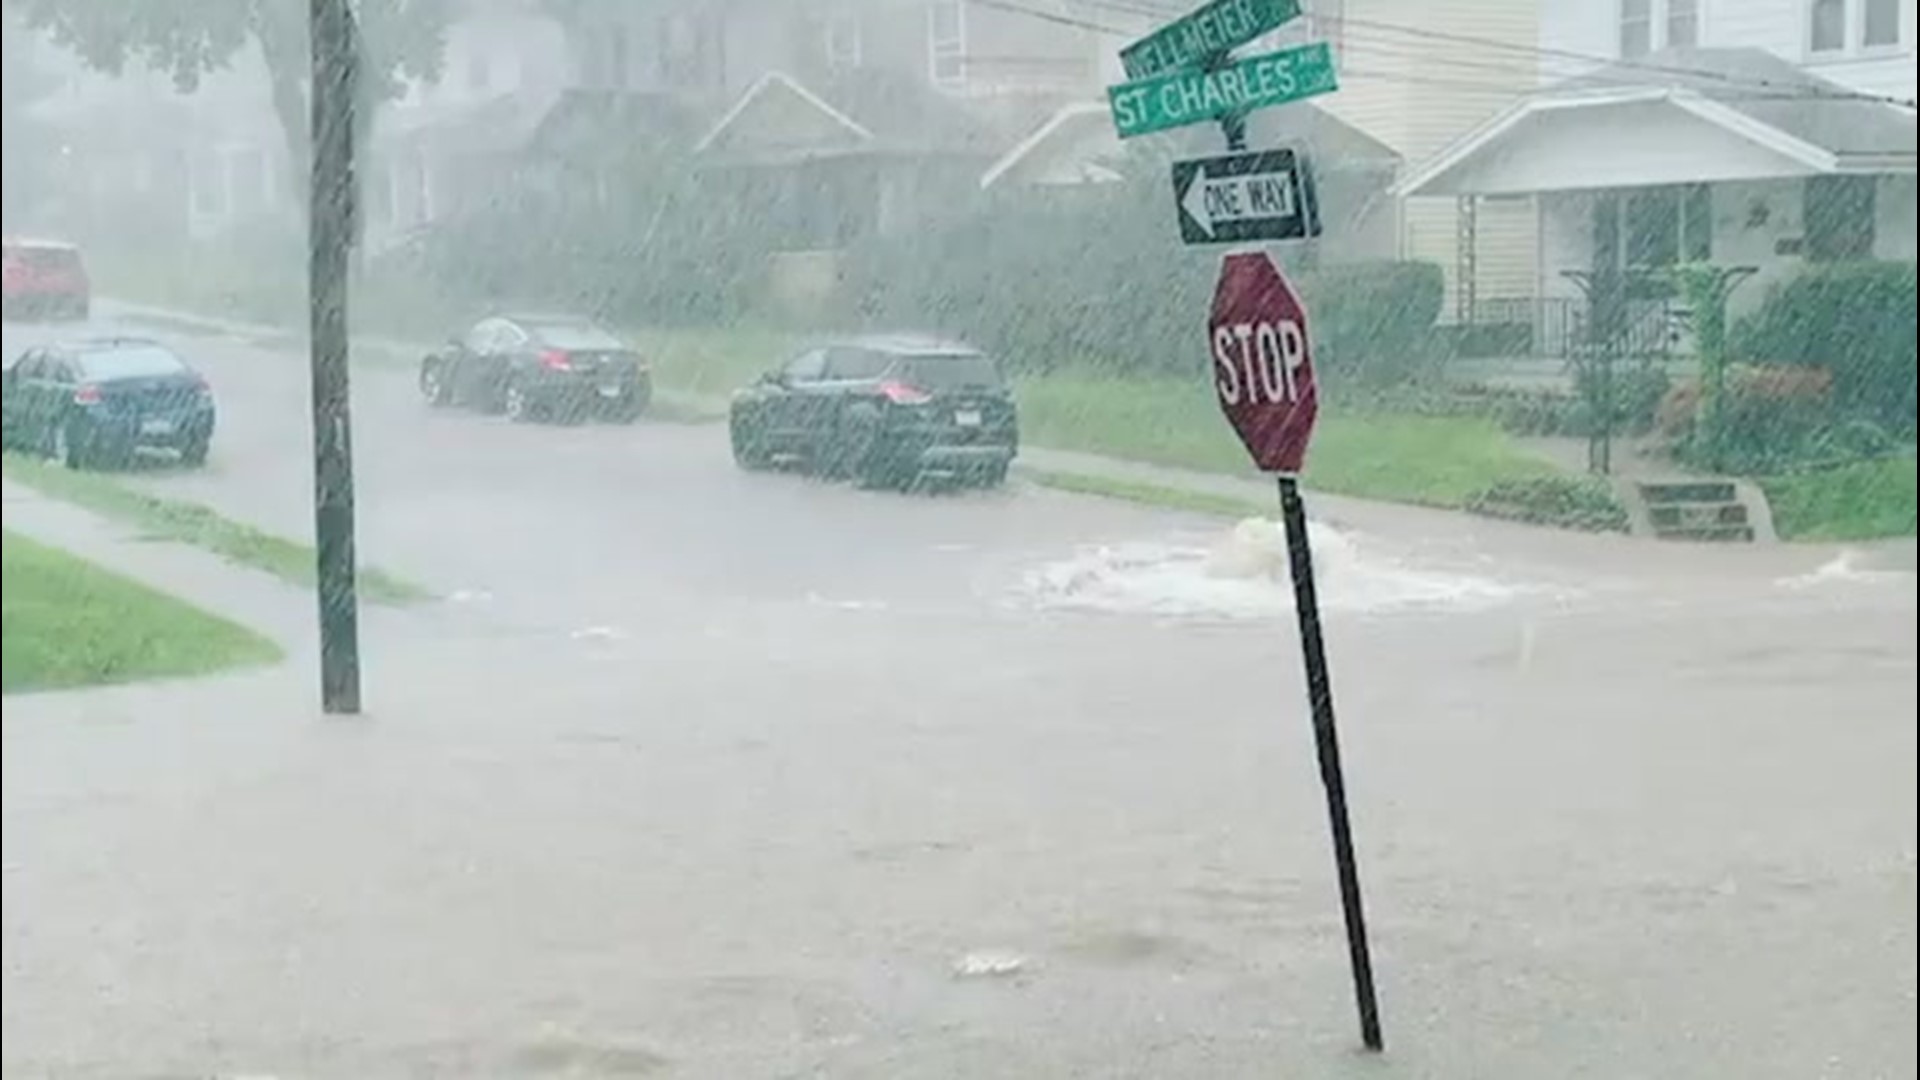 Drains in Dayton, Ohio, were overwhelmed by rains on Aug. 3, leading to some flooding.